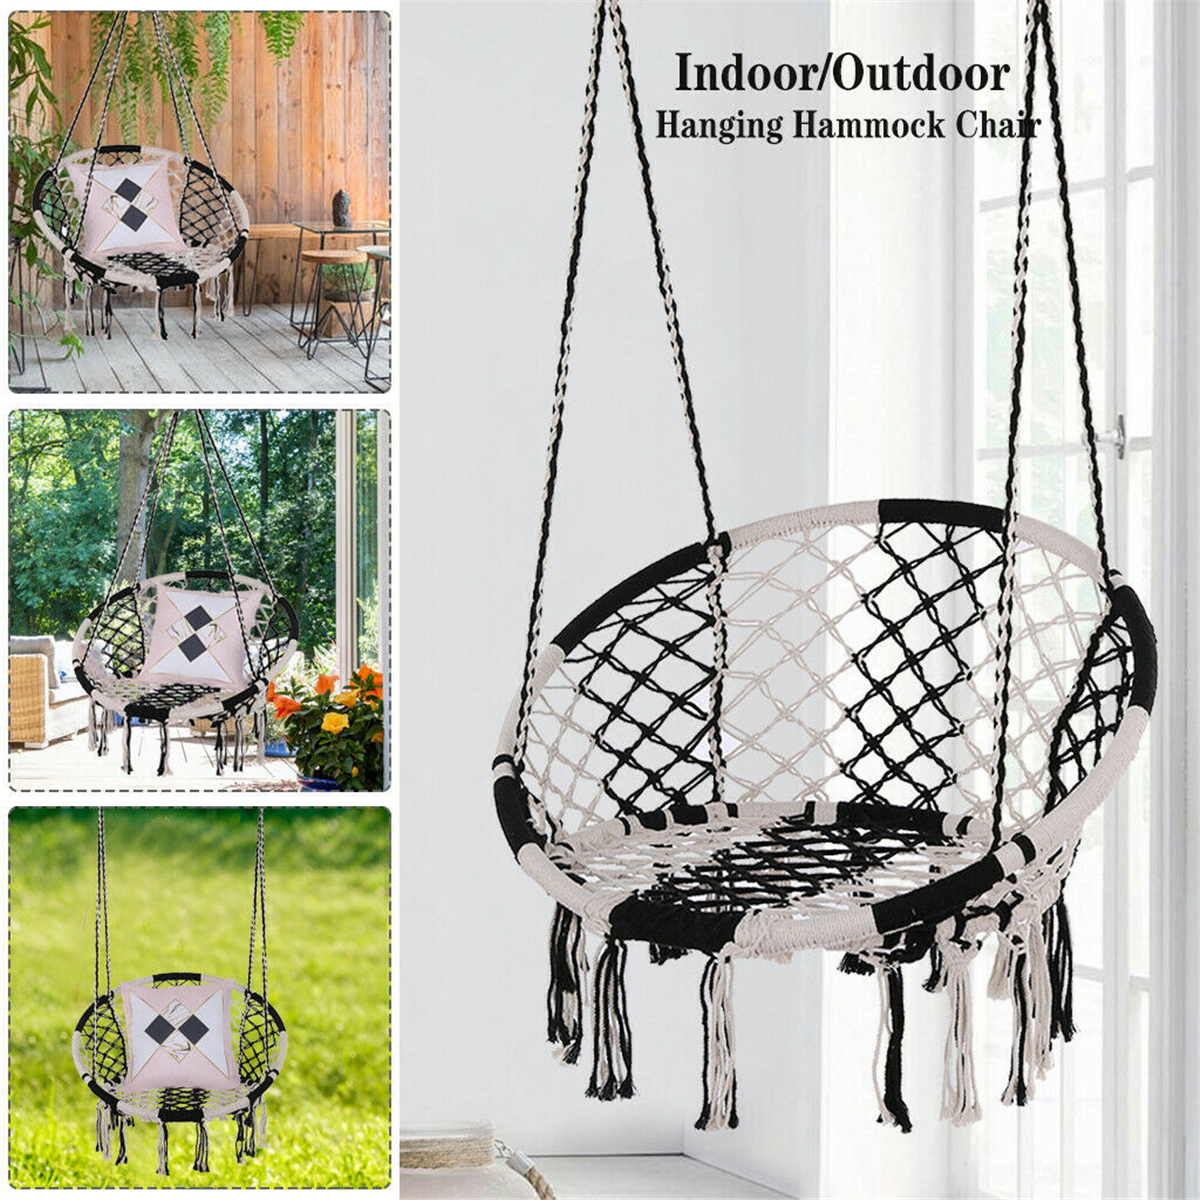 Hanging Hammock Chair Mesh Woven Rope Macrame Bar Chair Swing for Indoor/ Outdoor/ Home/ Bedroom/ Patio/ Yard/ Deck/ Garden Chair Seat, Home Decor Christmas Gifts Festival Gift - image 4 of 7